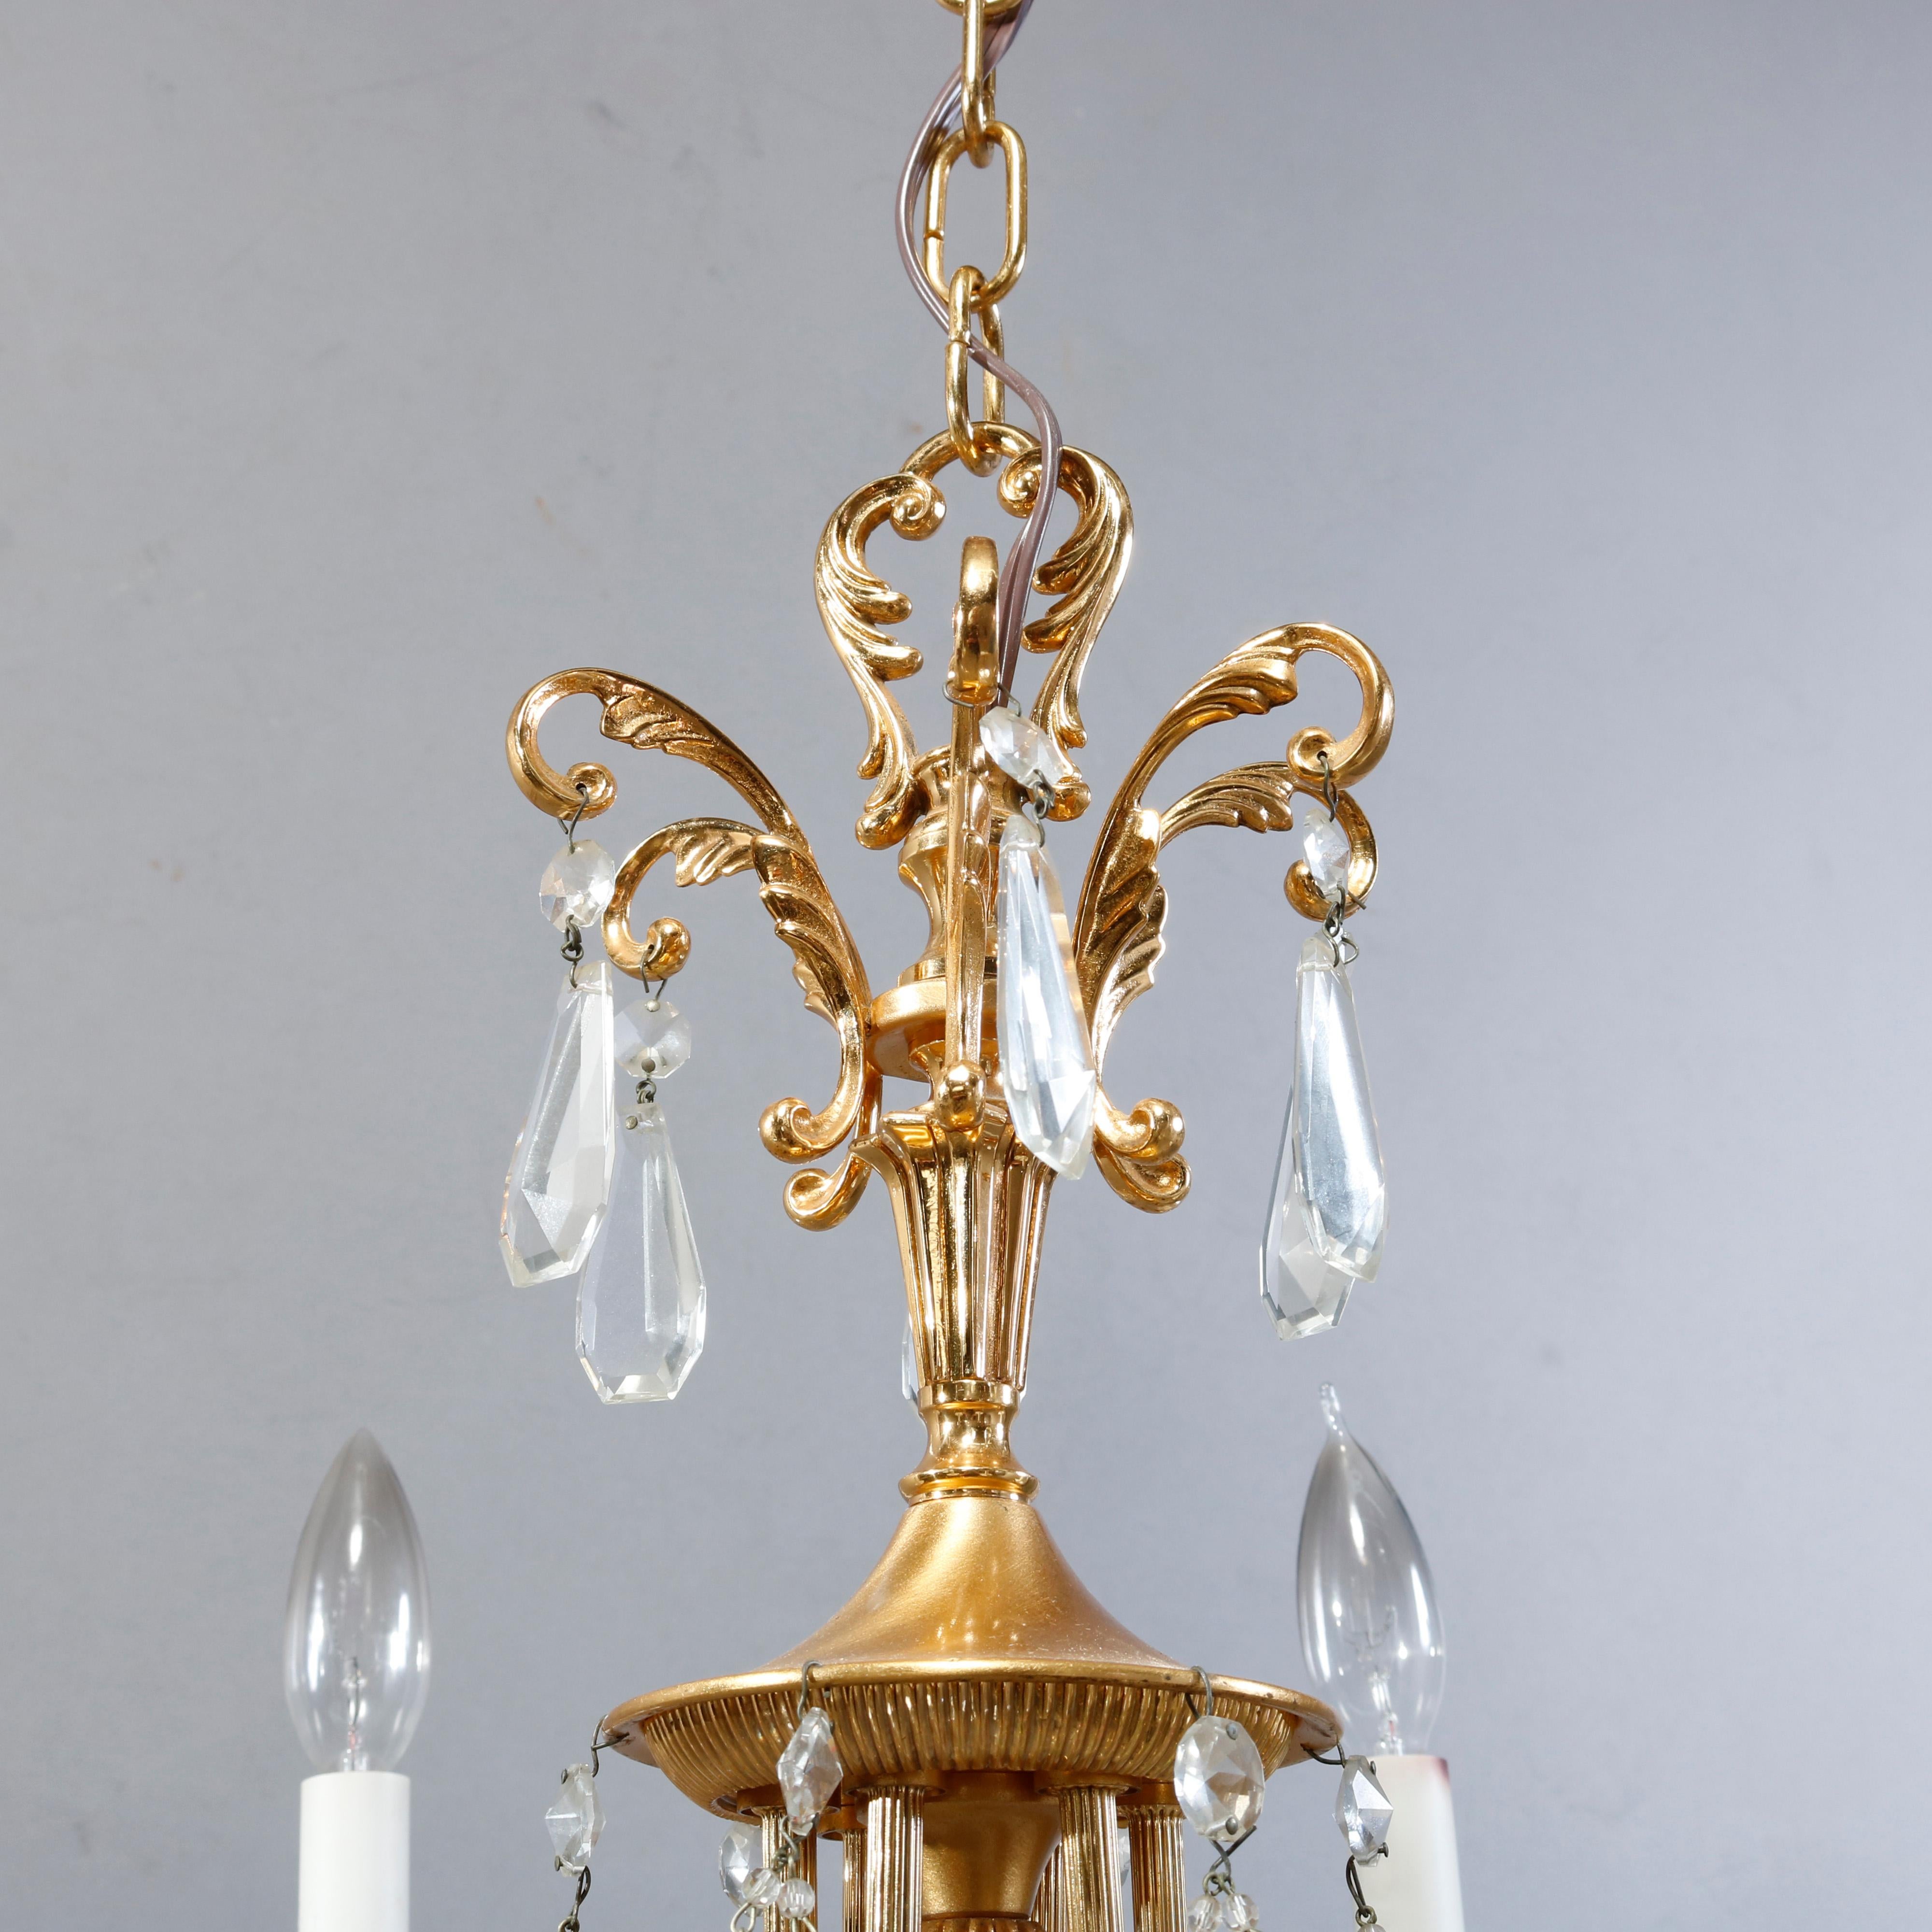 A vintage French style chandelier offers brass frame with six c-scroll reeded arms terminating in urn form sockets with flanking foliate elements and candle lights, strung cut crystals throughout, c1940

Measures: 19.5